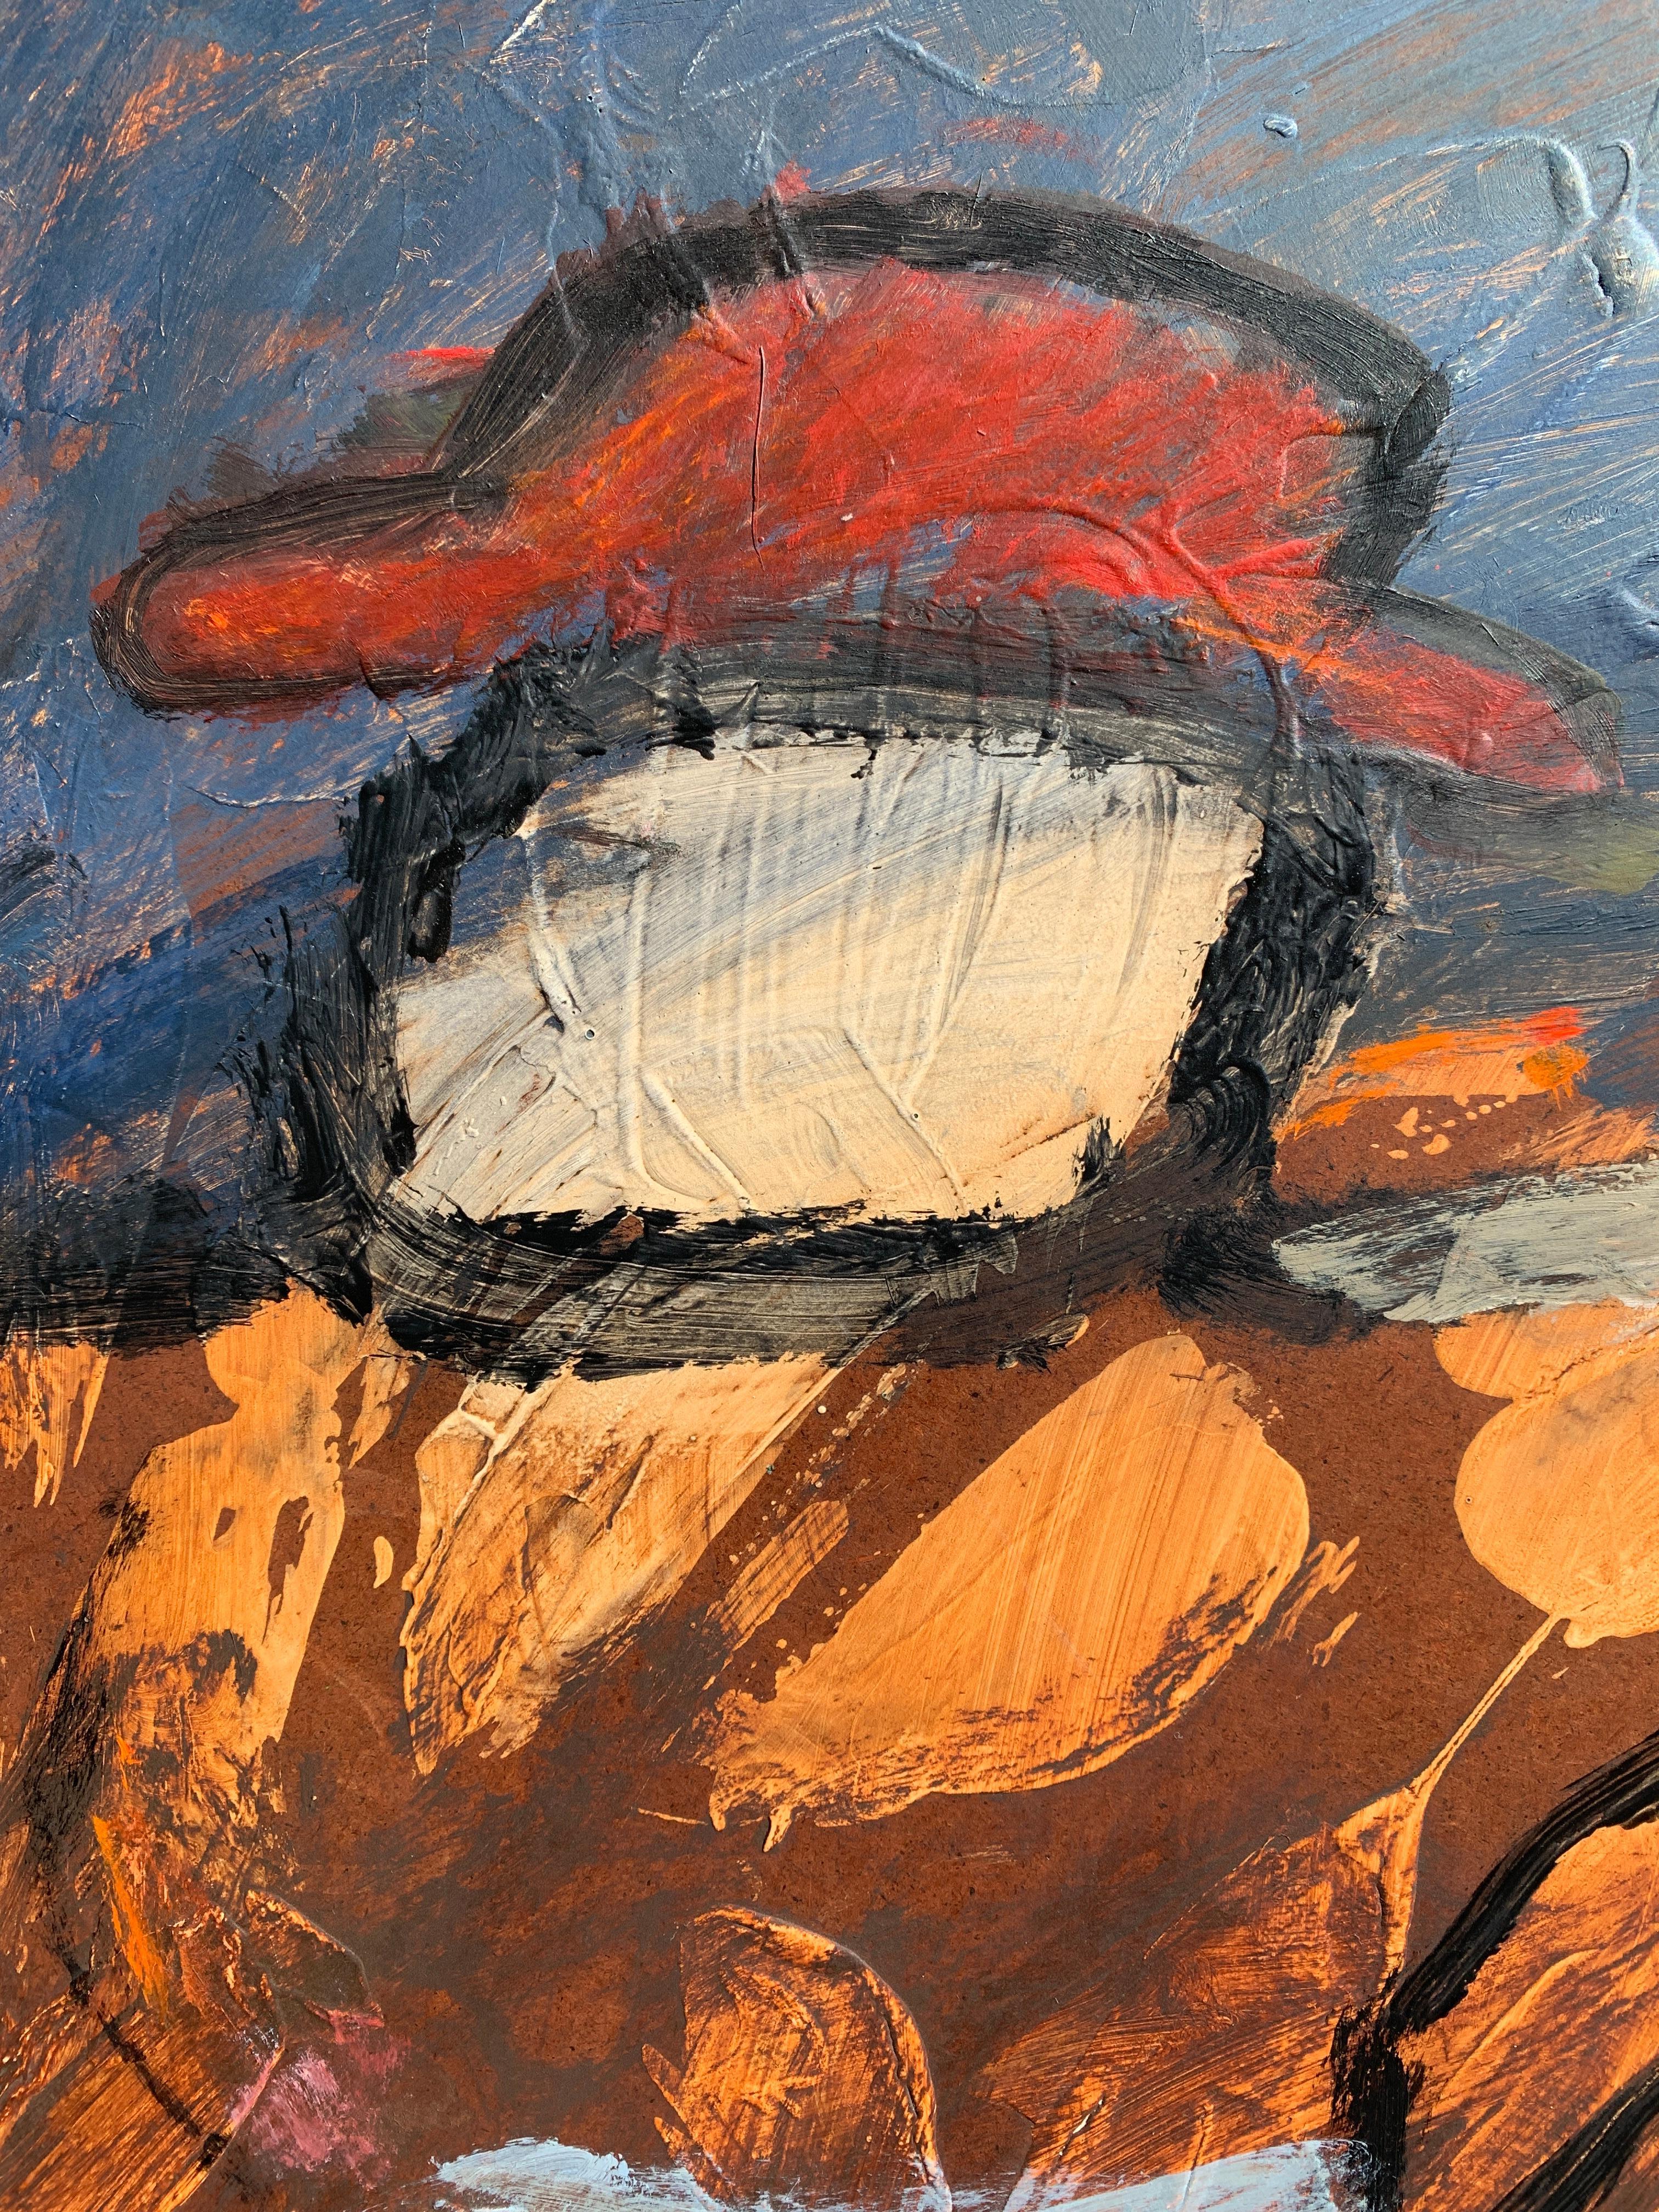 Sylvia Rutkoff (1919-2011)
Sr11-1
c.1960s
“The Cowboy”
Oil impasto on Masonite
42x36 period frame
Signed on reverse in pencil
Collection acquired from family estate
